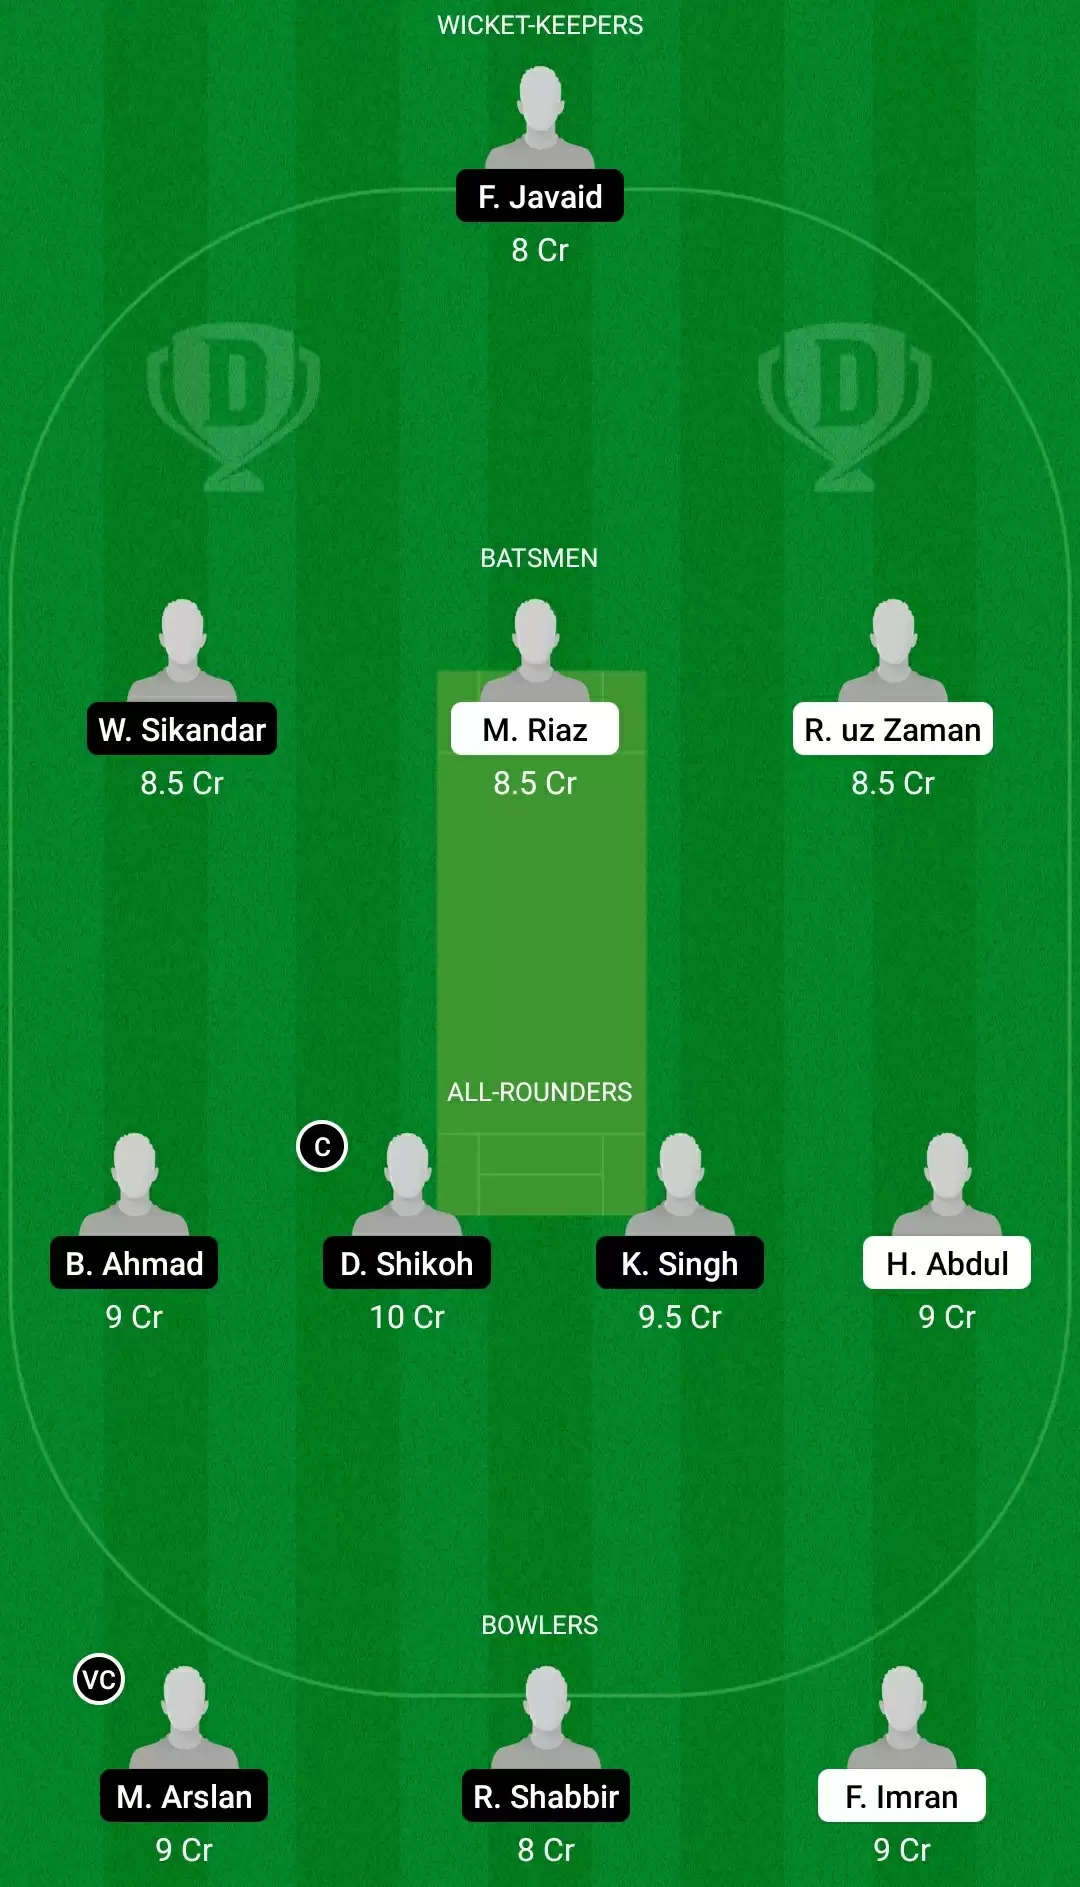 ECS T10 Brescia 2021, Match 16: PLG vs CIV Dream11 Prediction, Fantasy Cricket Tips, Team, Playing 11, Pitch Report, Weather Conditions and Injury Update